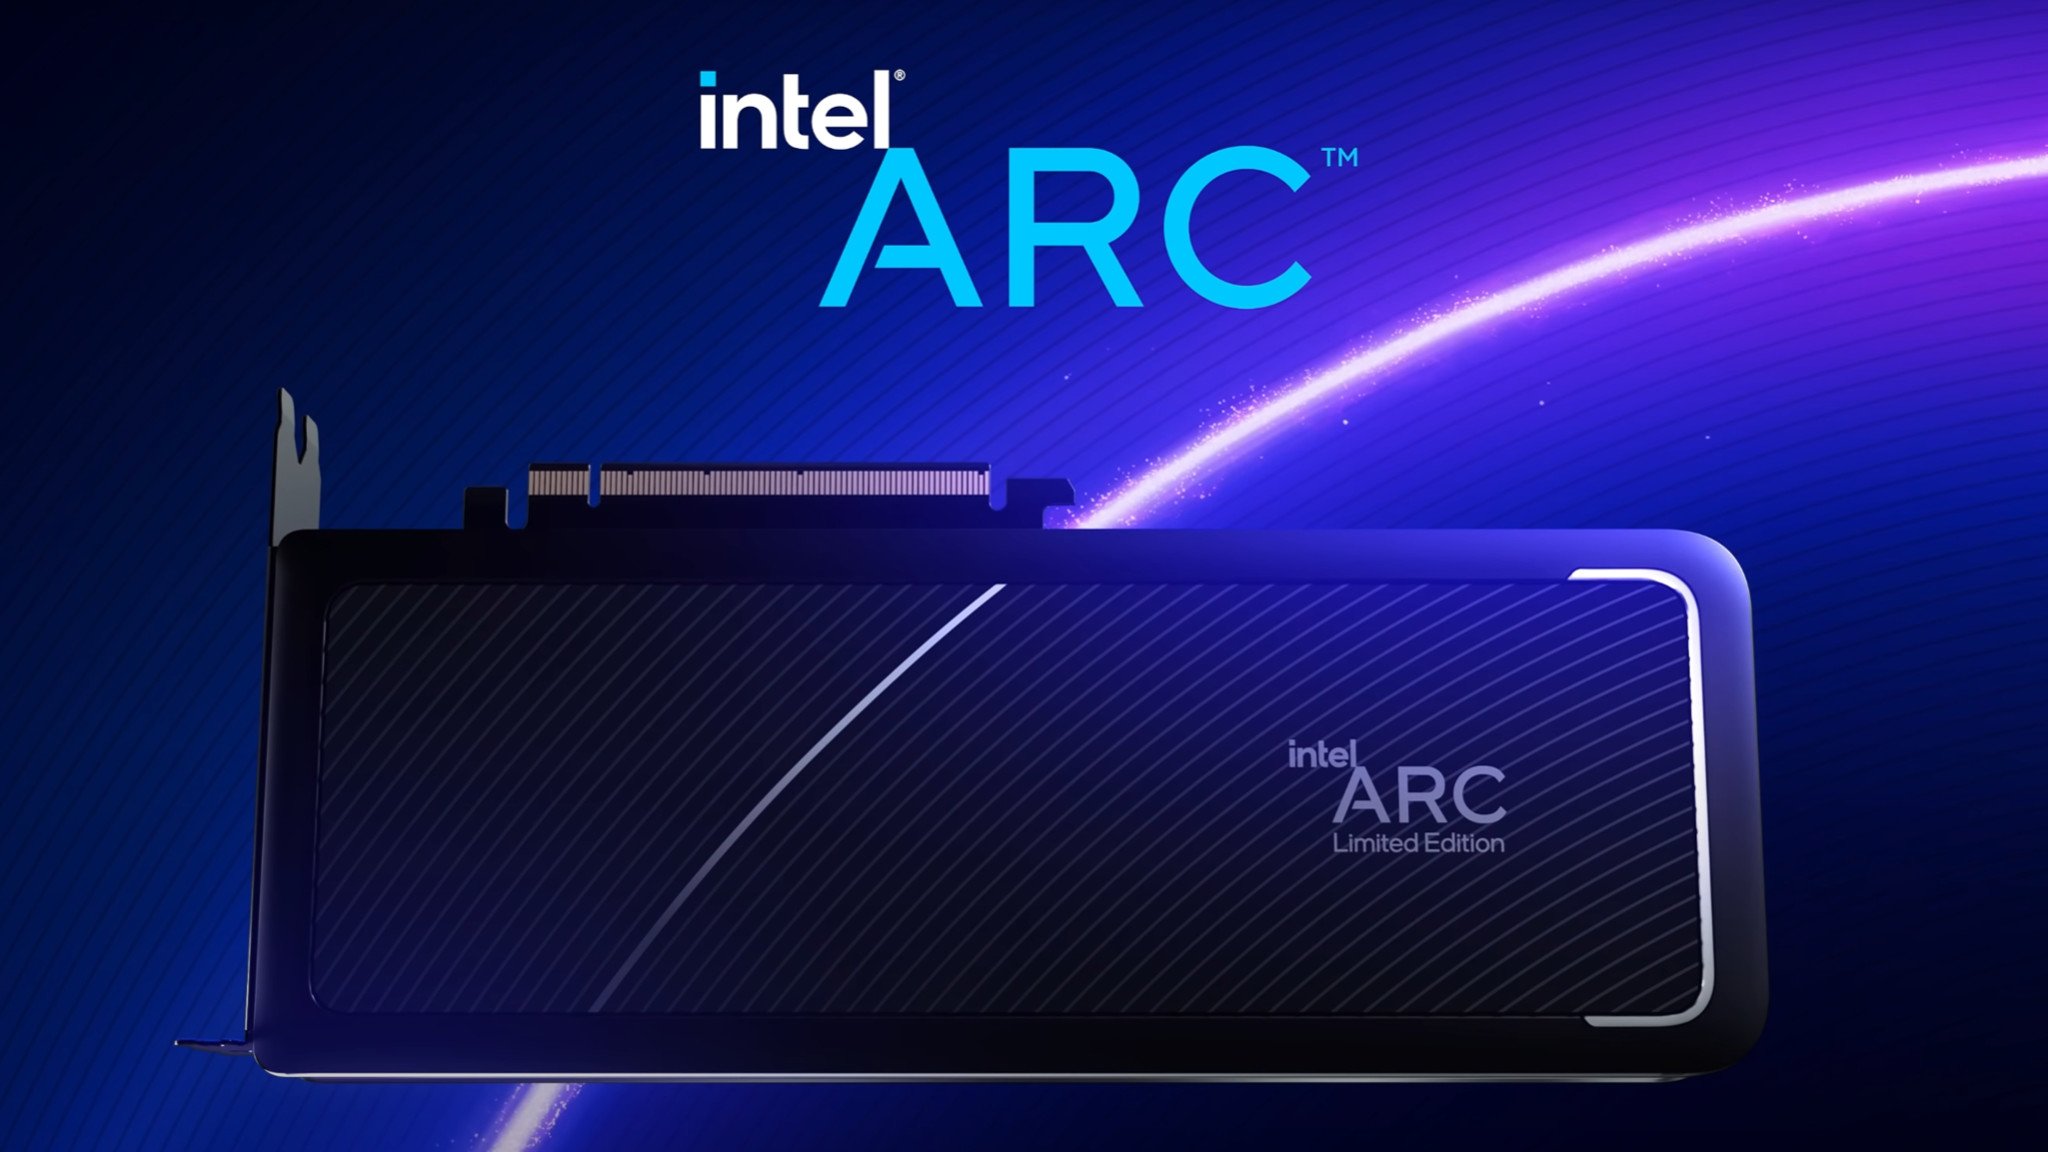 Intel Arc A750 and Arc A770 Graphics Cards Now On Sale Worldwide – Intel